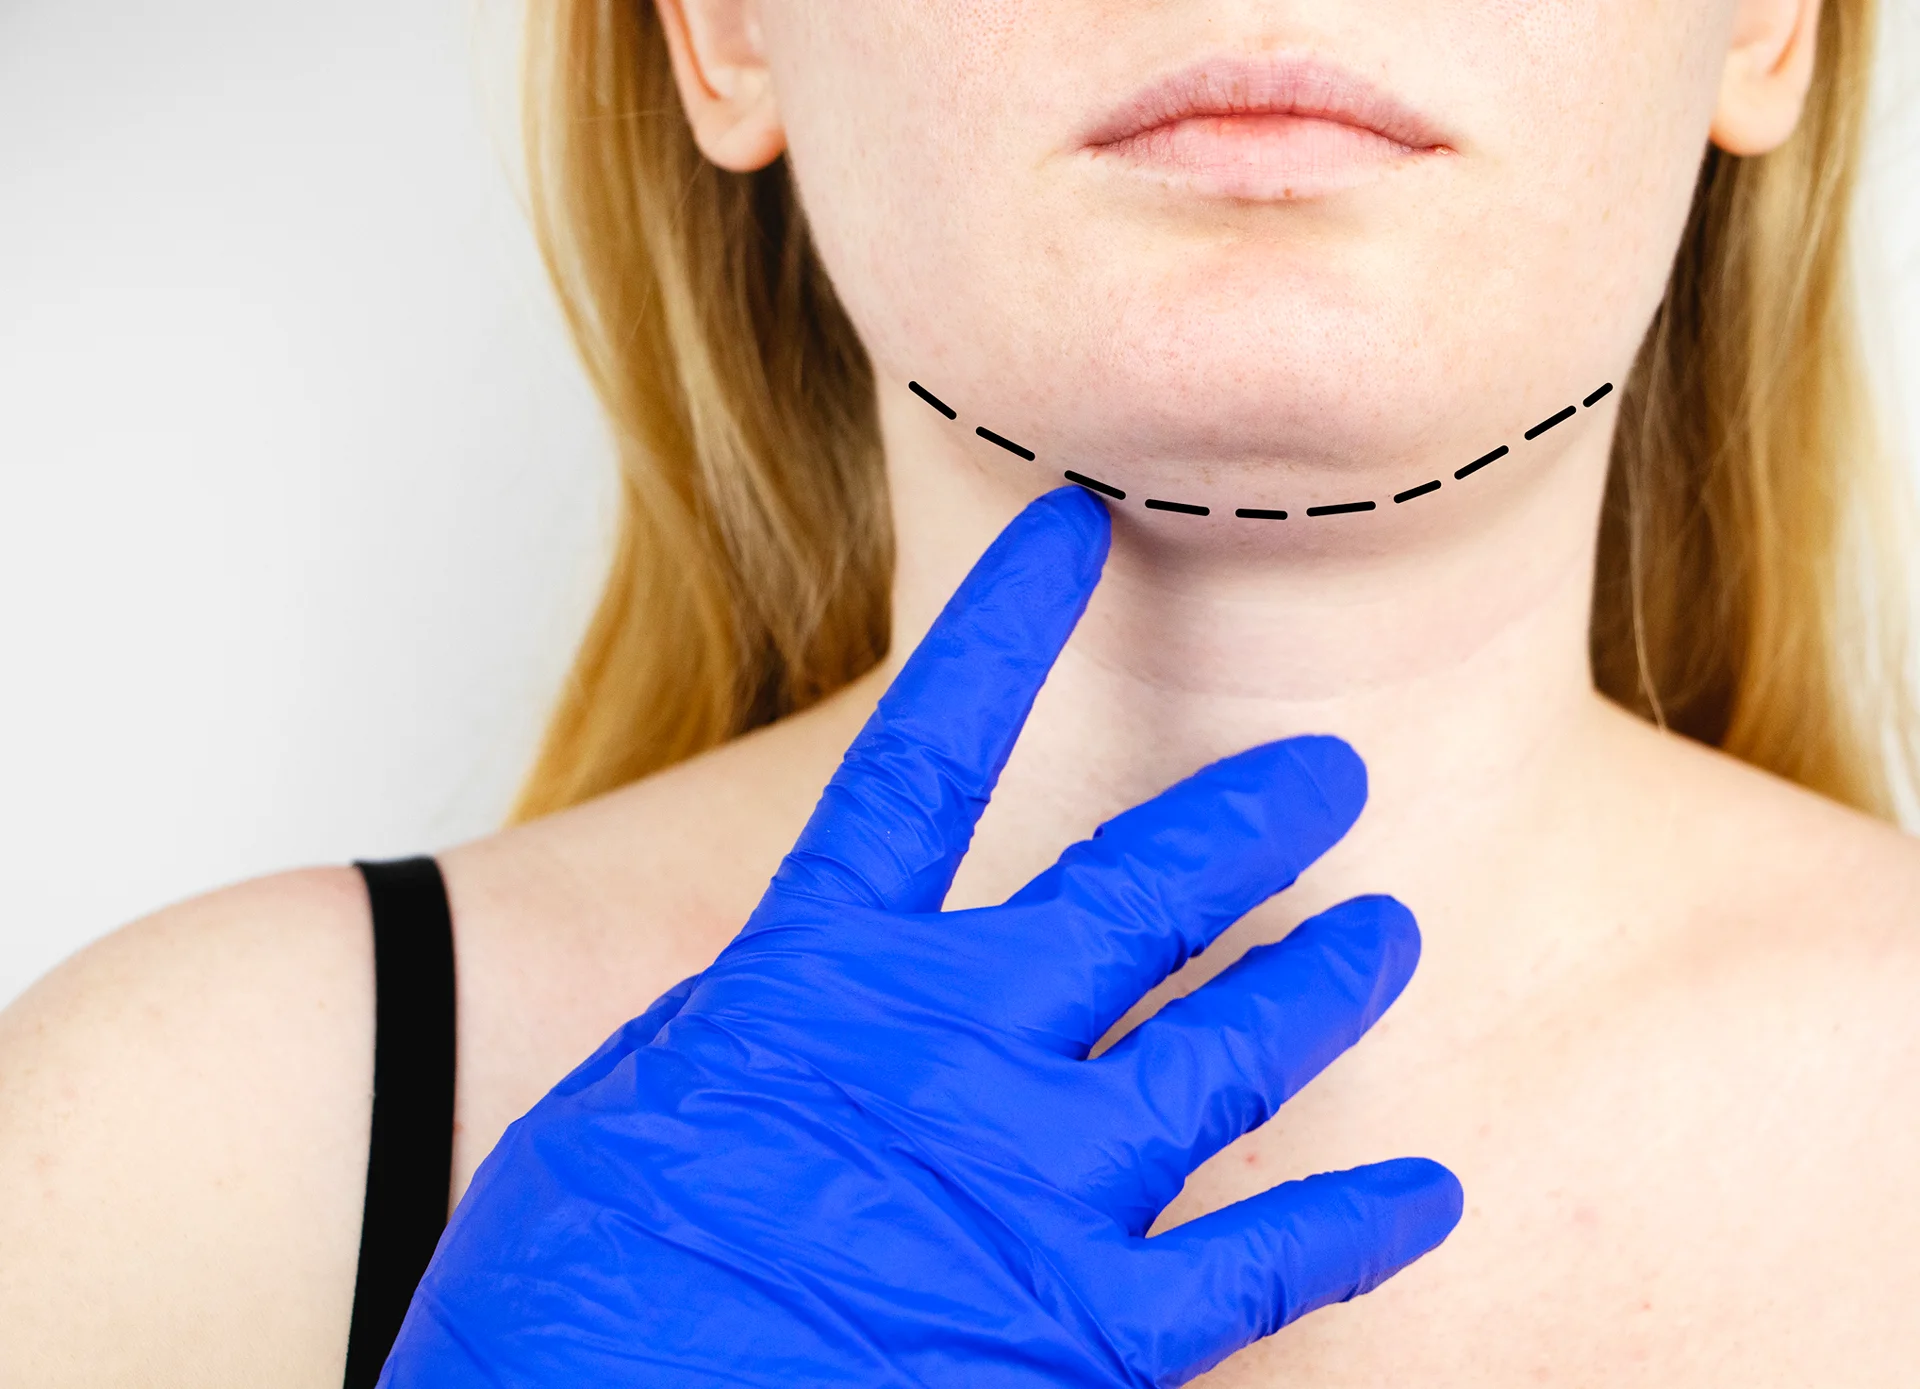 A woman with a swollen lymph nodes on her neck after chin liposuction.